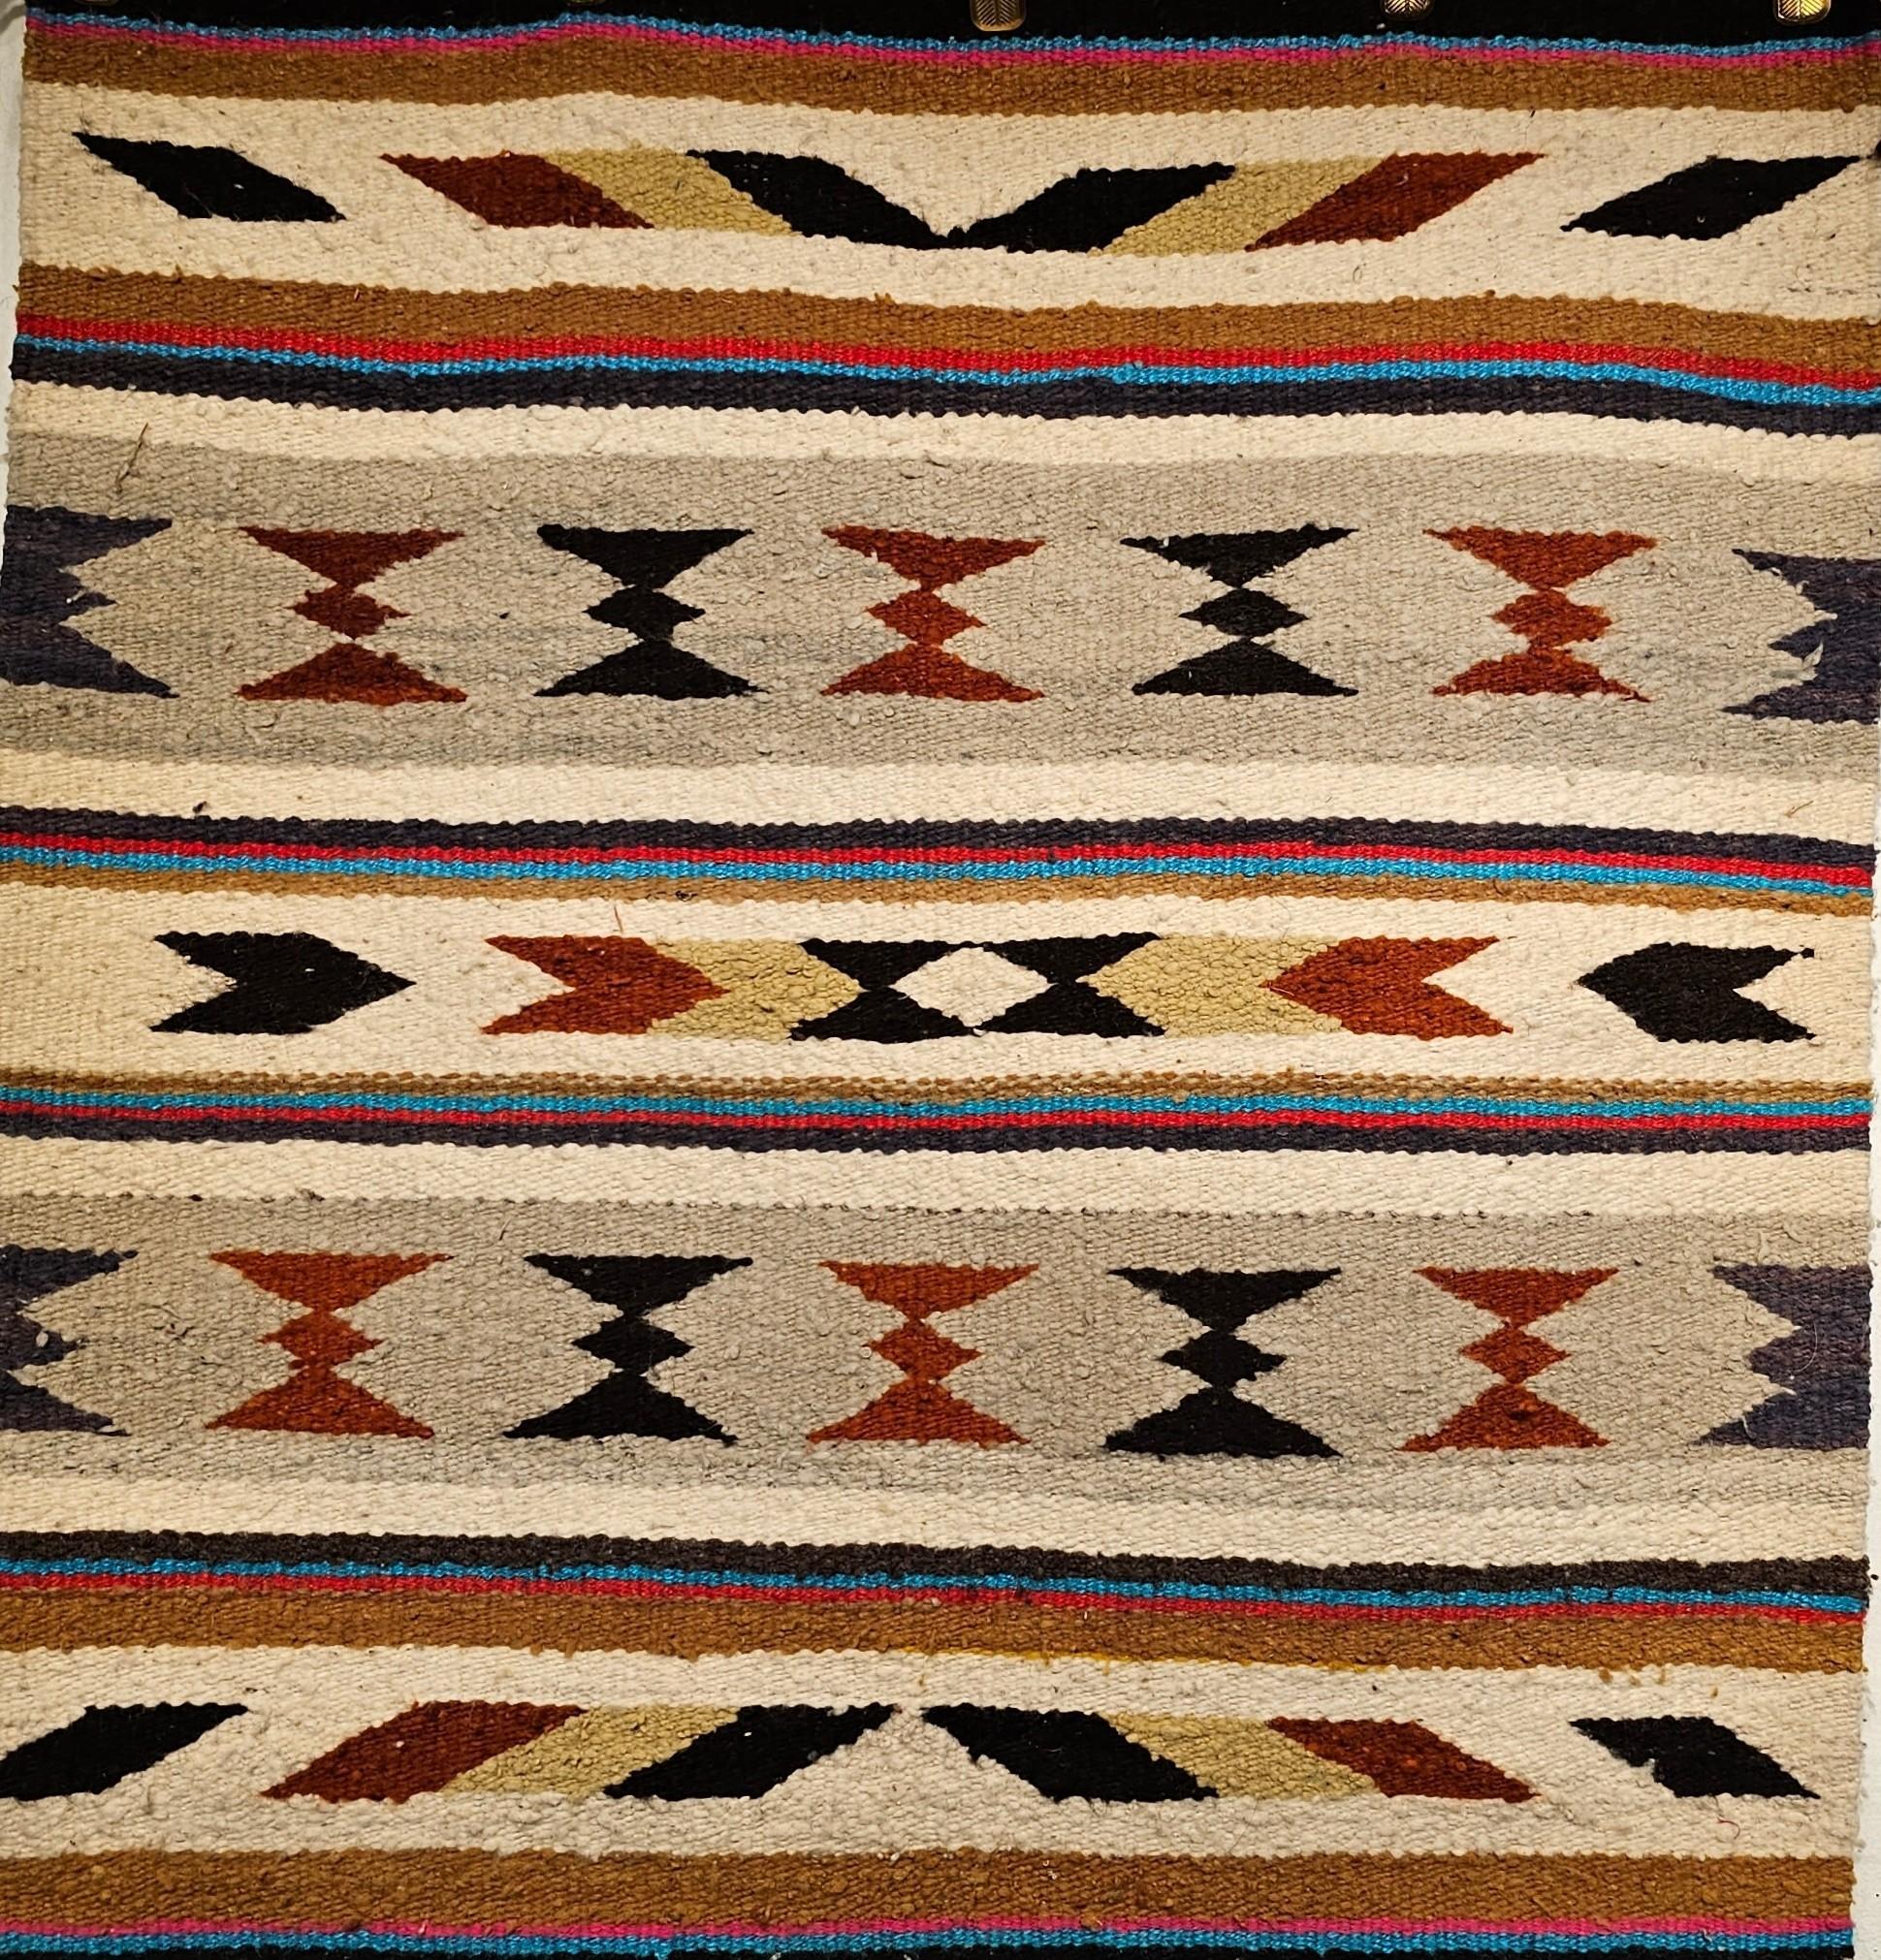 Vintage Native American Navajo saddle blanket in striped pattern from the 3rd quarter of the 1900s.  There is a series of geometric designs in bands that alternate between bands.  The colors in this Navajo rug are in beautiful earth tones including